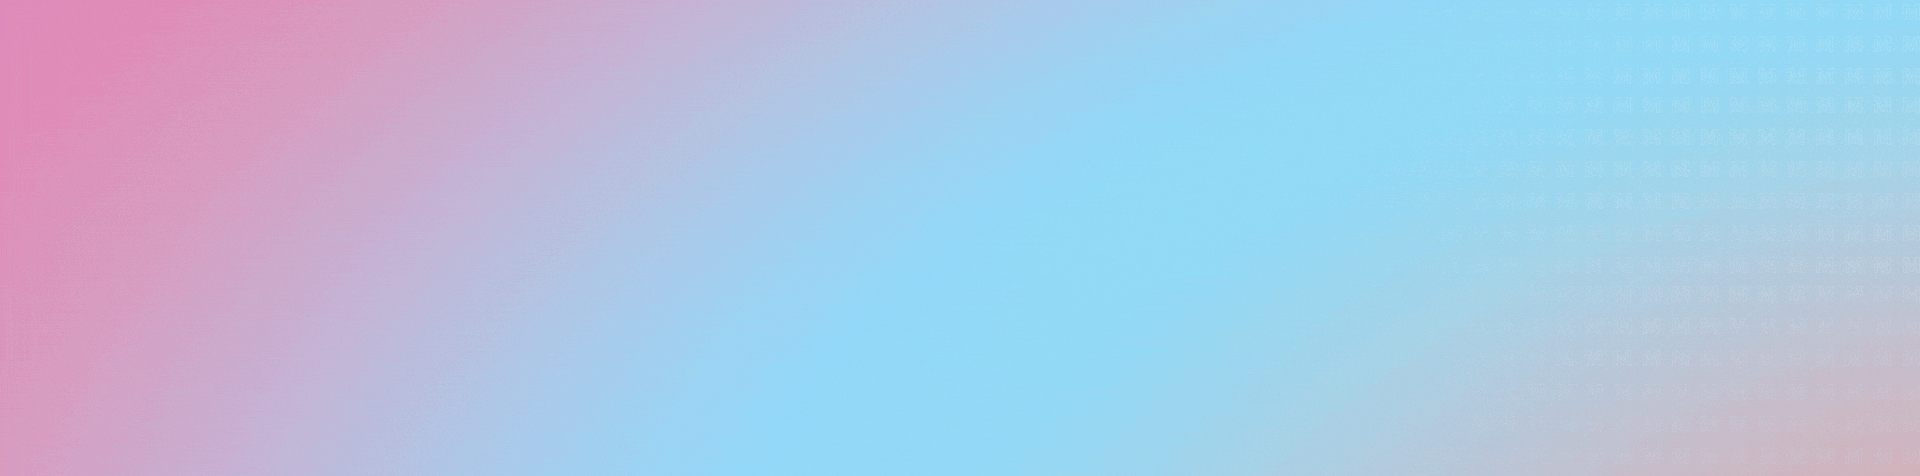 Gradient moving gif of pink and blue colors behind a shoe.